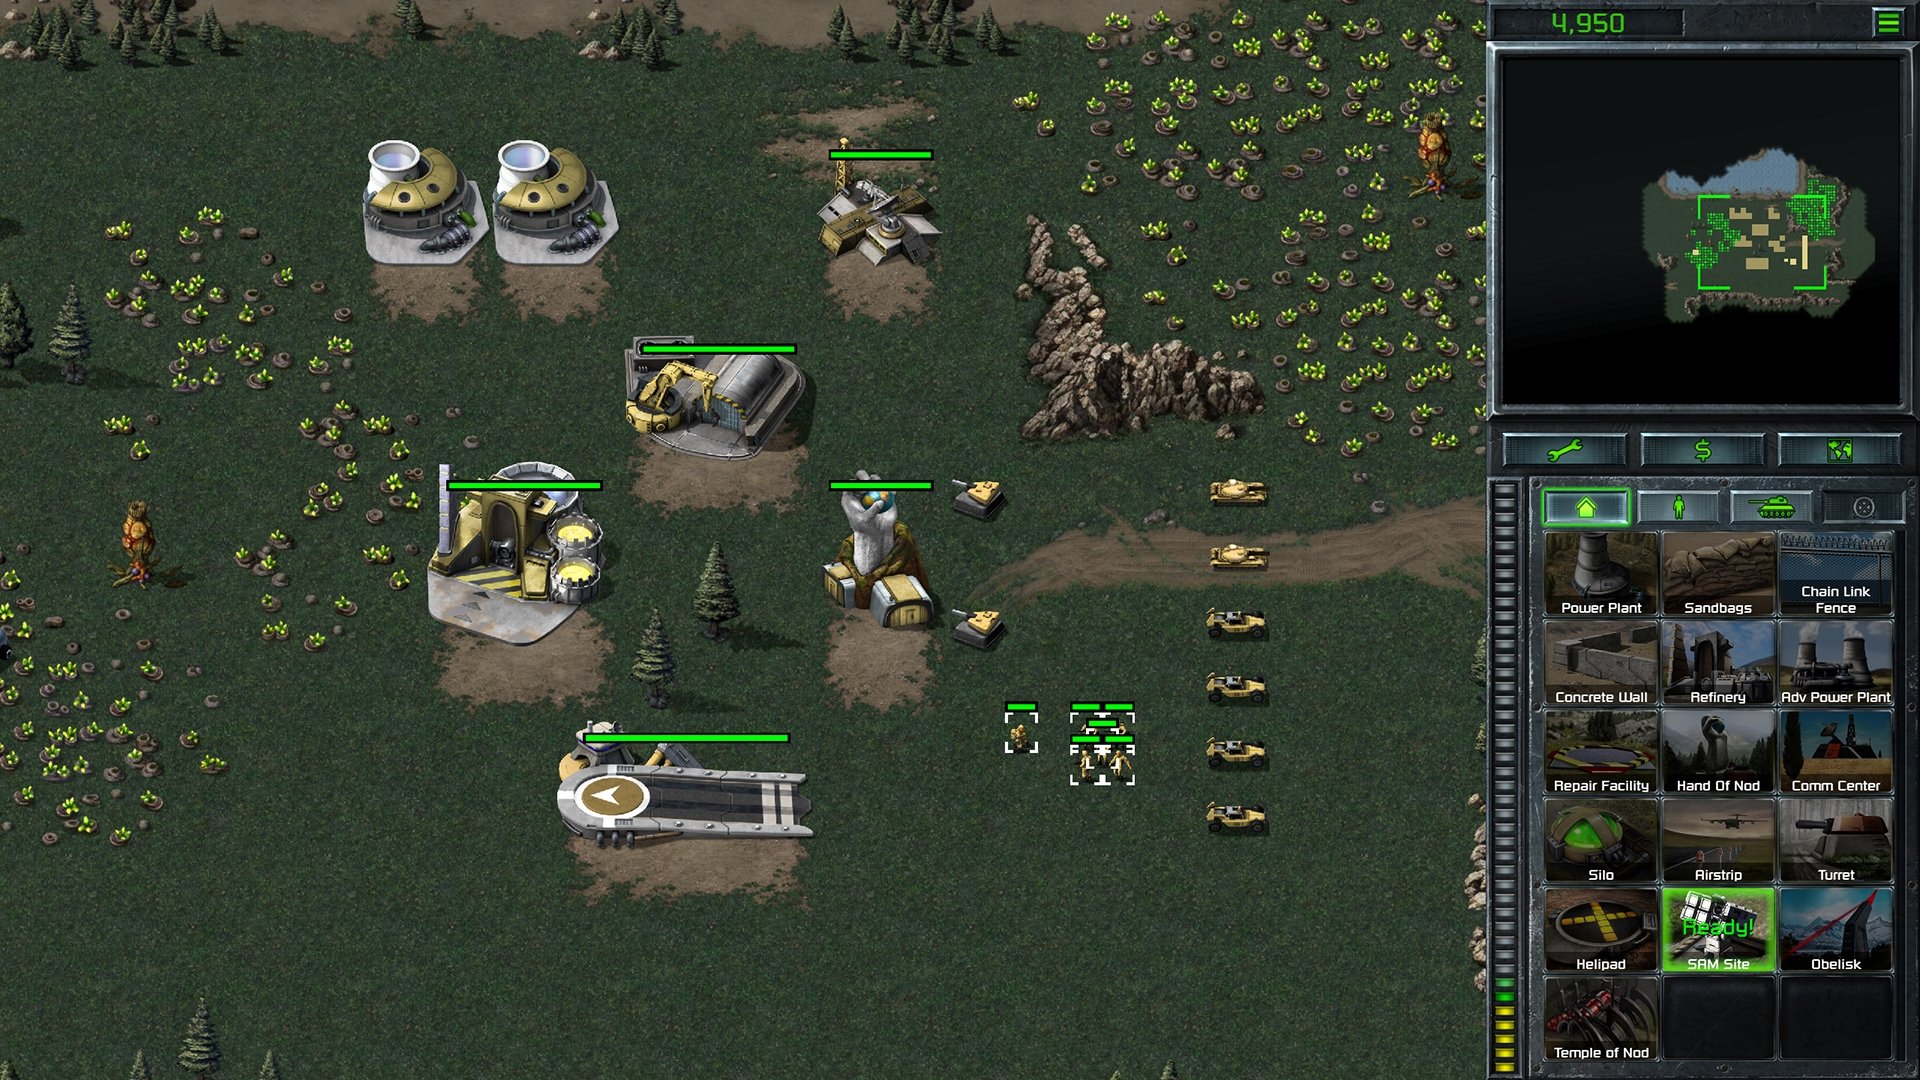 A screenshot from Command & Conquer Remastered video game. (Photo courtesy of Electronic Arts)